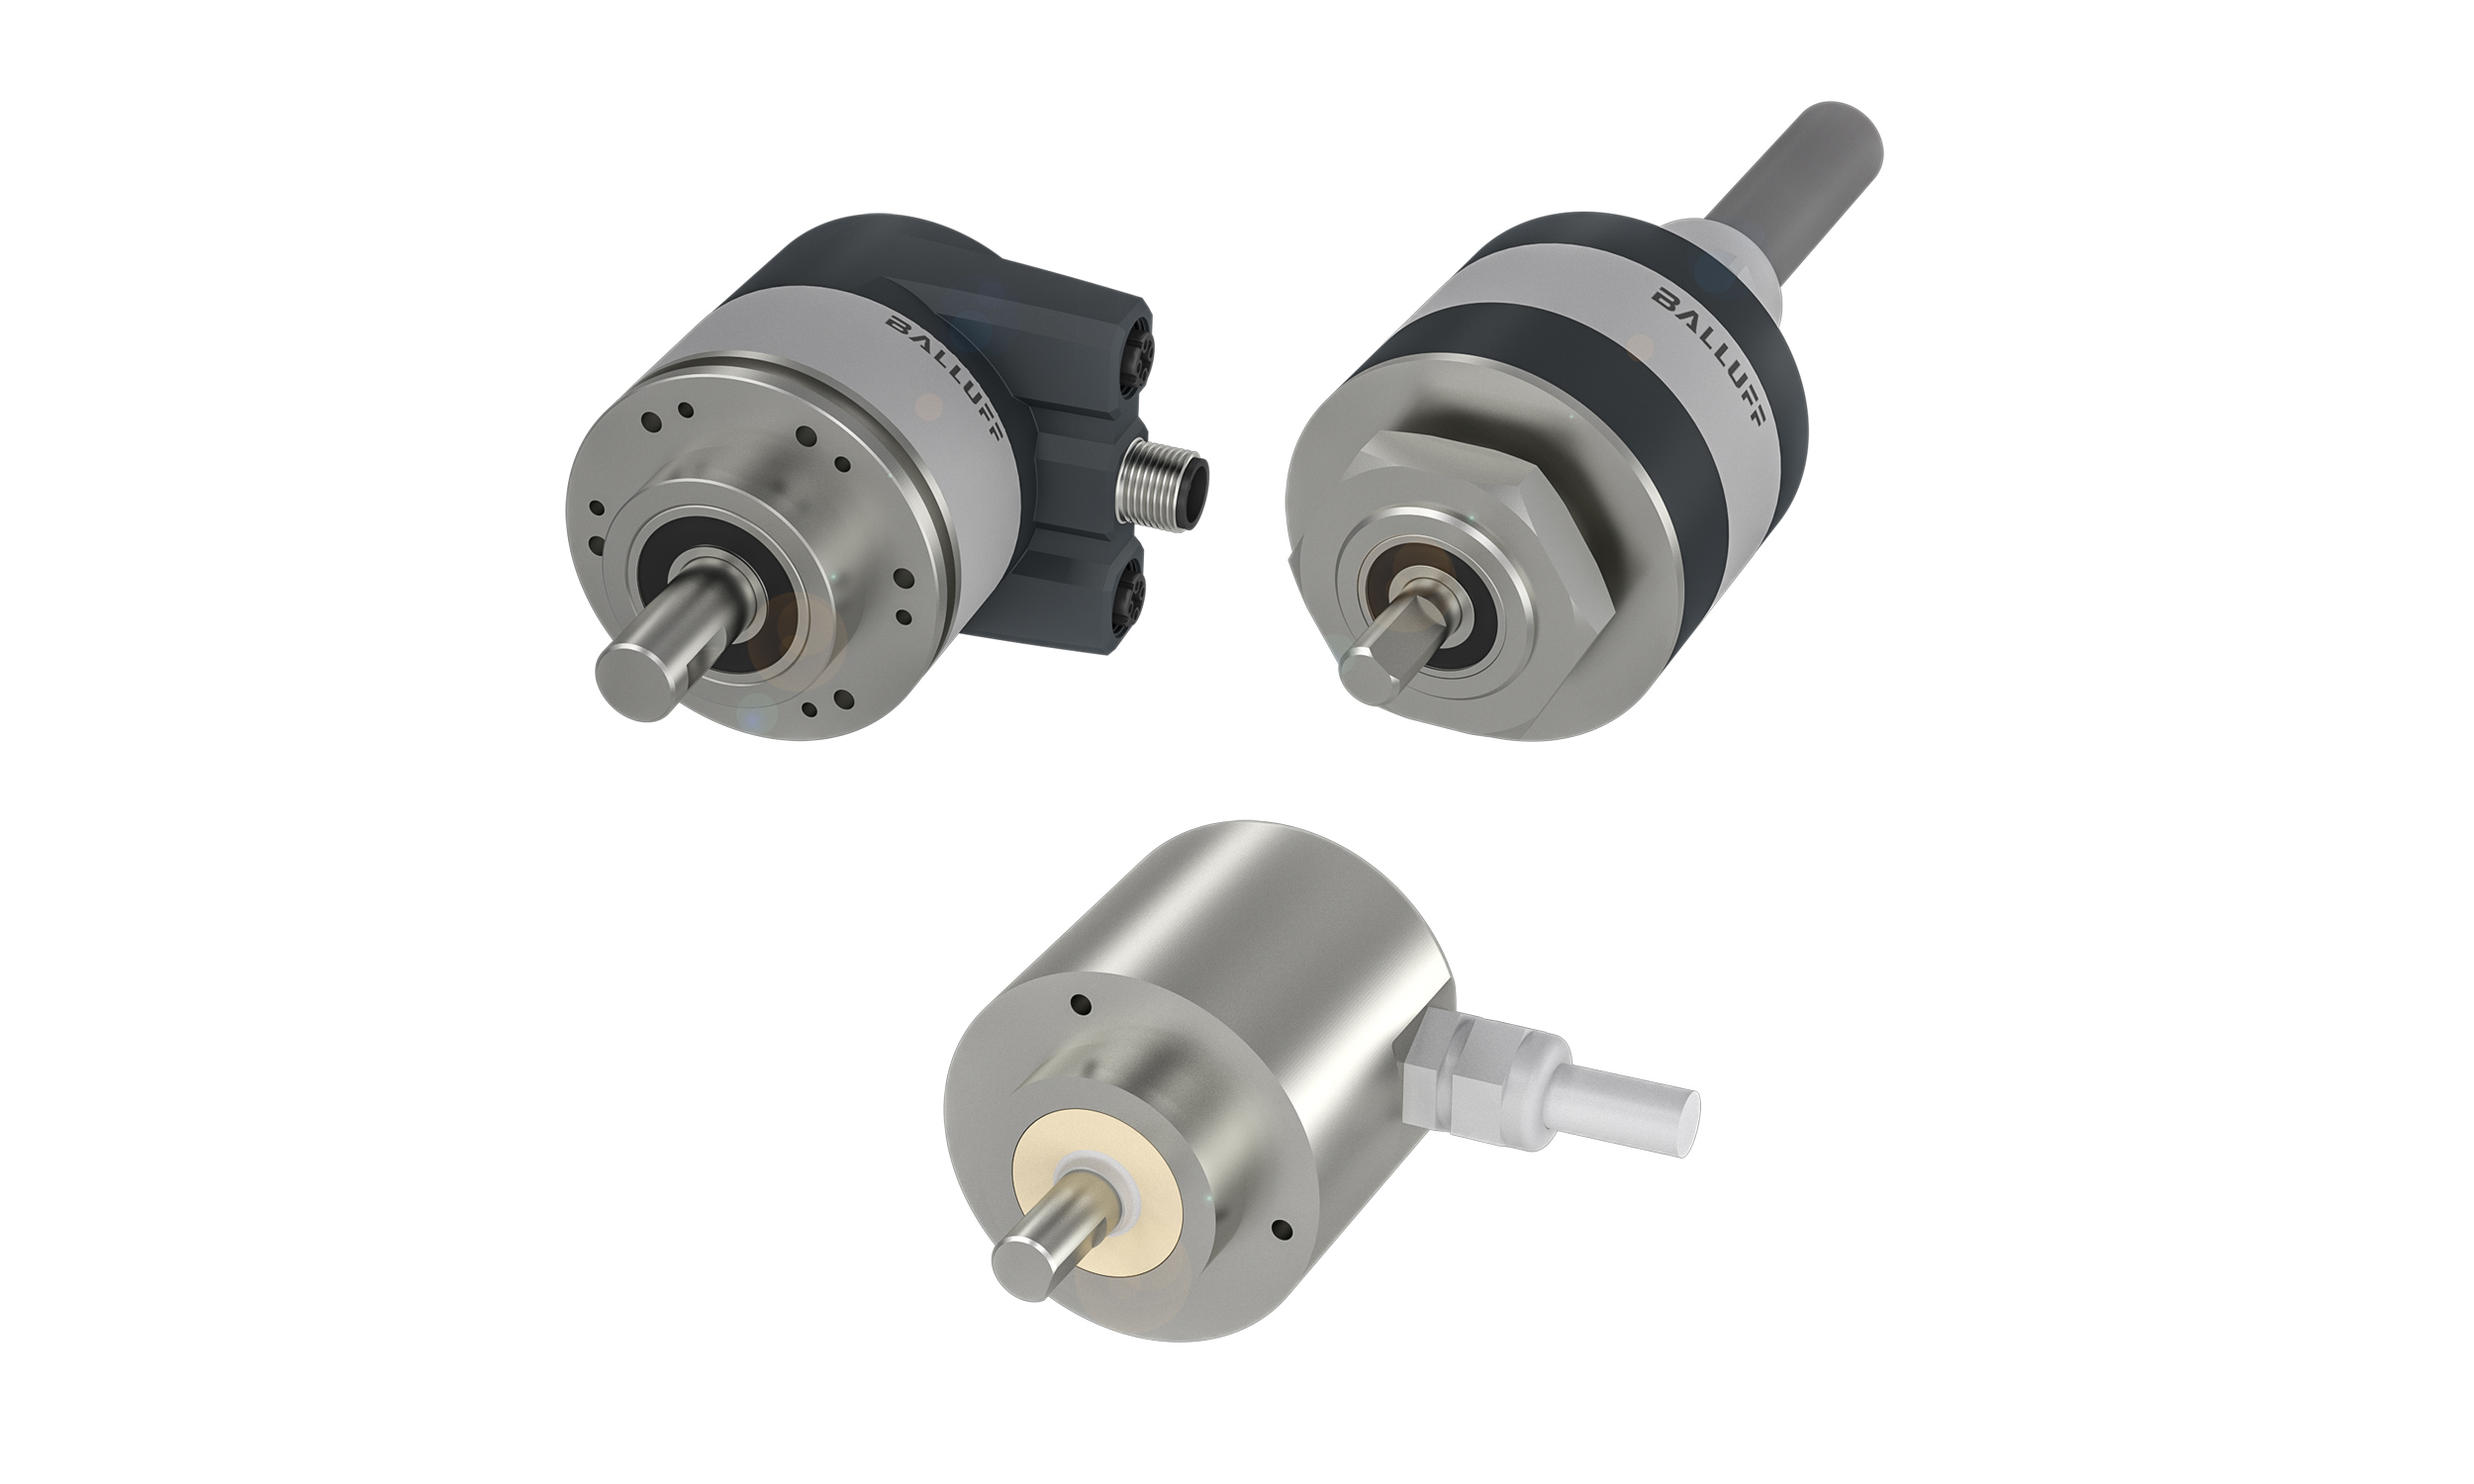 High accuracy Encoders  for industrial applications